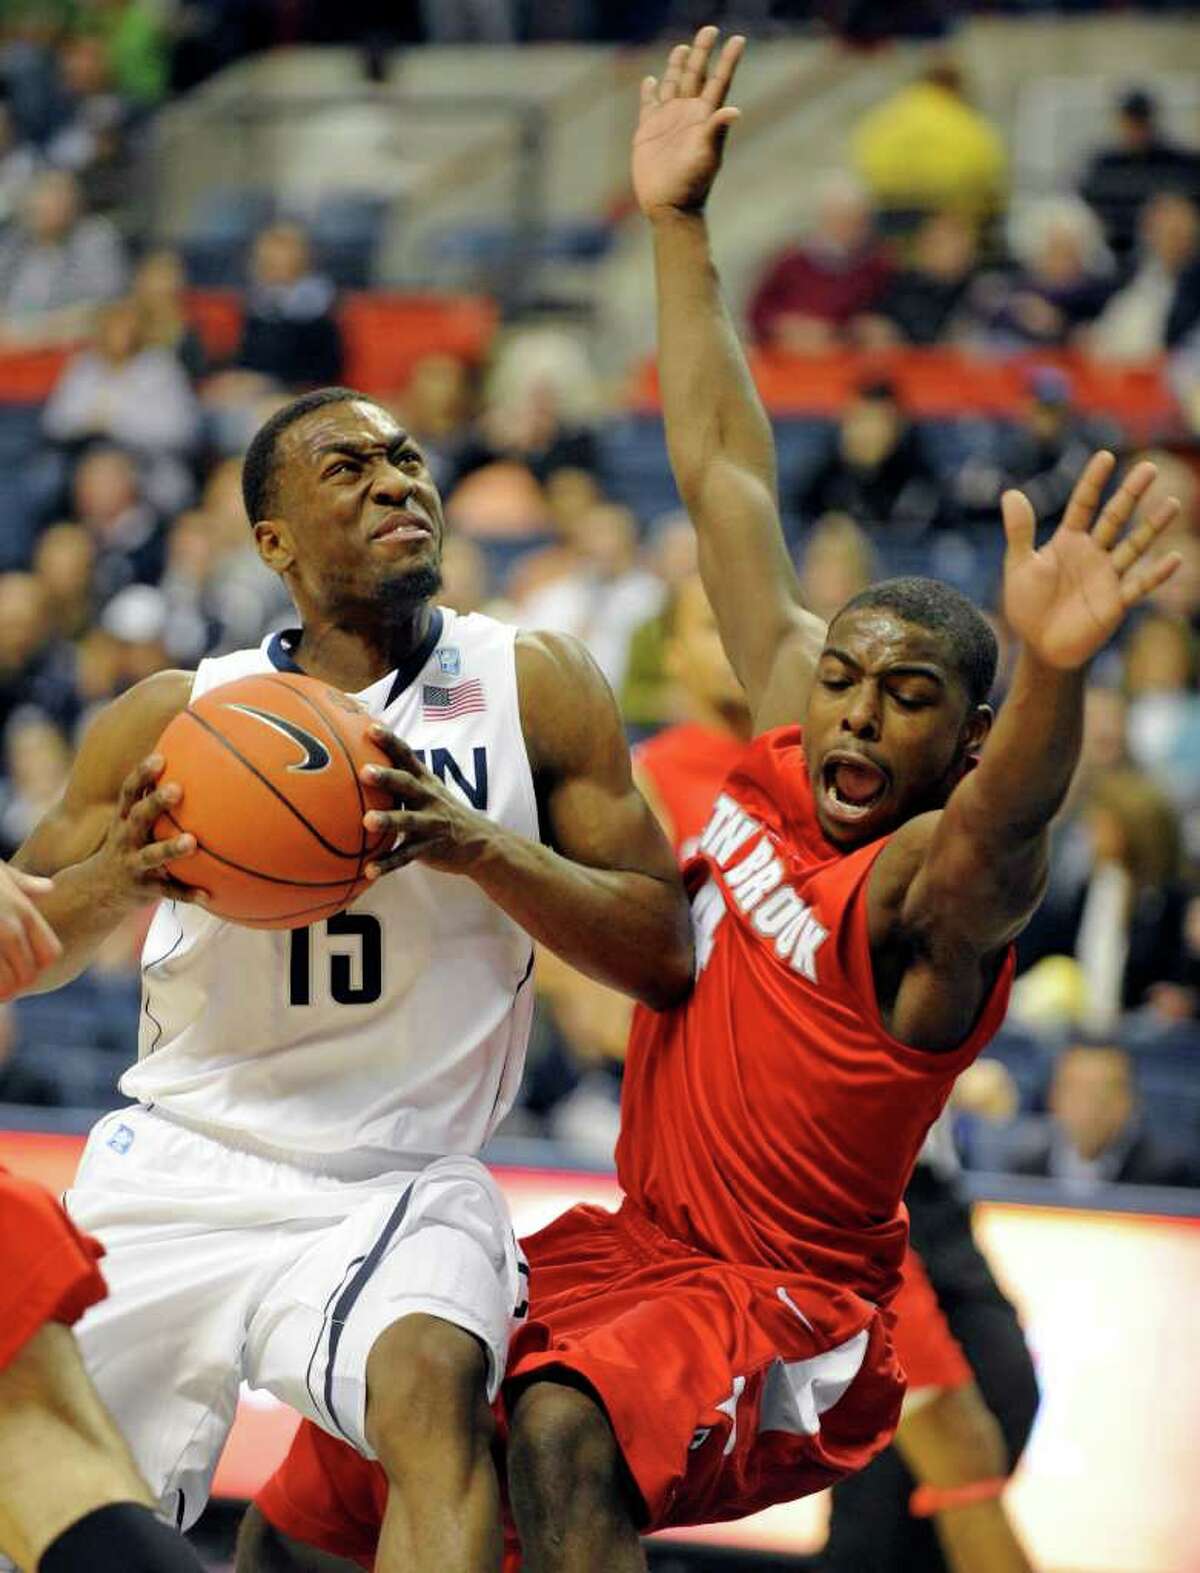 Connecticut's Kemba Walker, left, drives past Stony Brook's Anthony Jackson during the first half of their NCAA college basketball game in Storrs, Conn., on Friday, Nov. 12, 2010. (AP Photo/Fred Beckham)